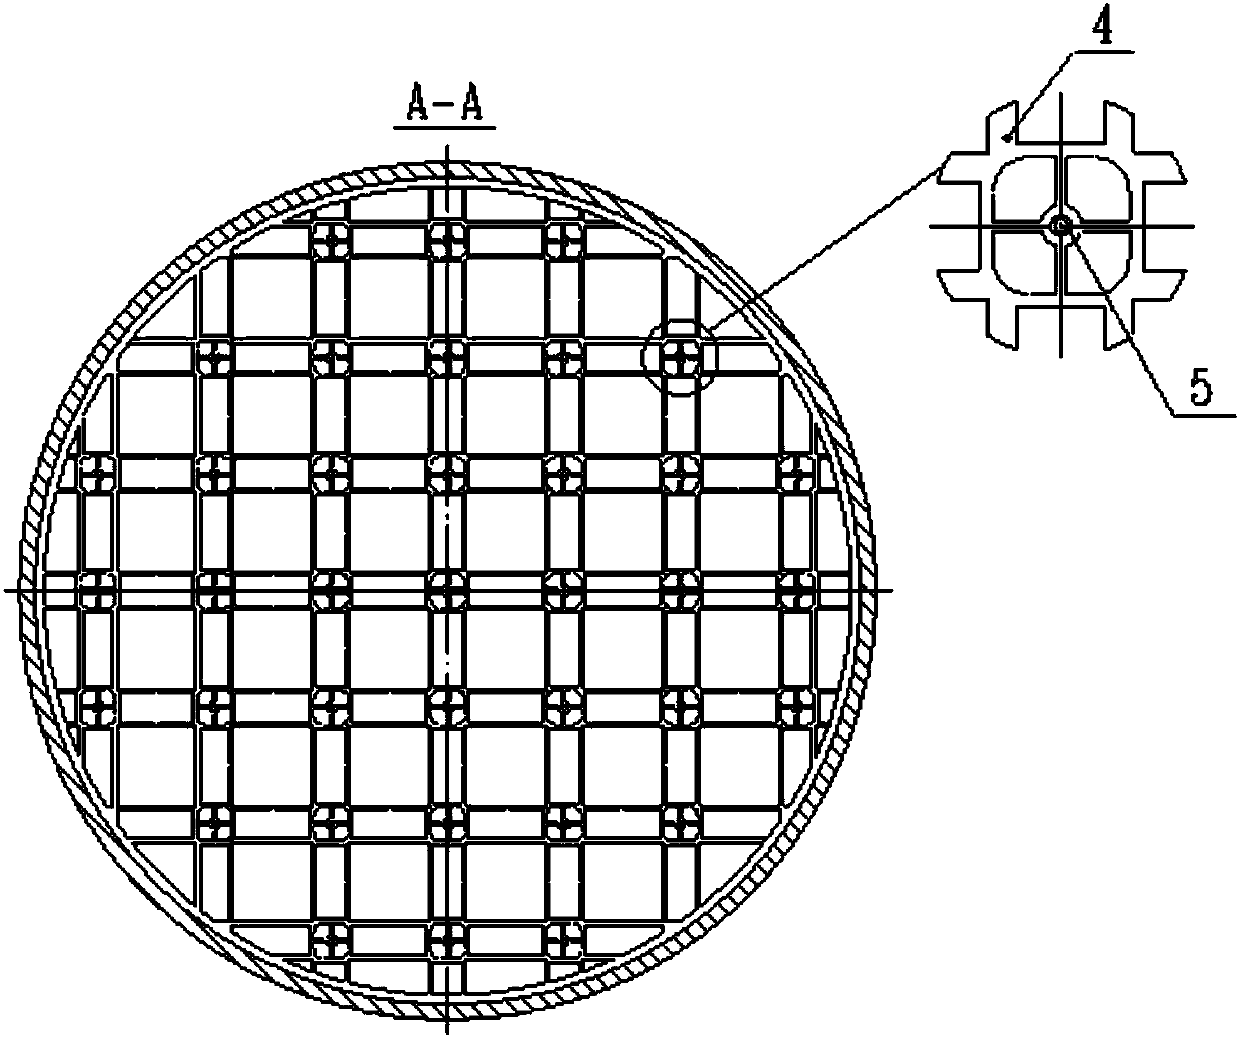 Limiting plate structure, upper reactor inner component and suspension basket component